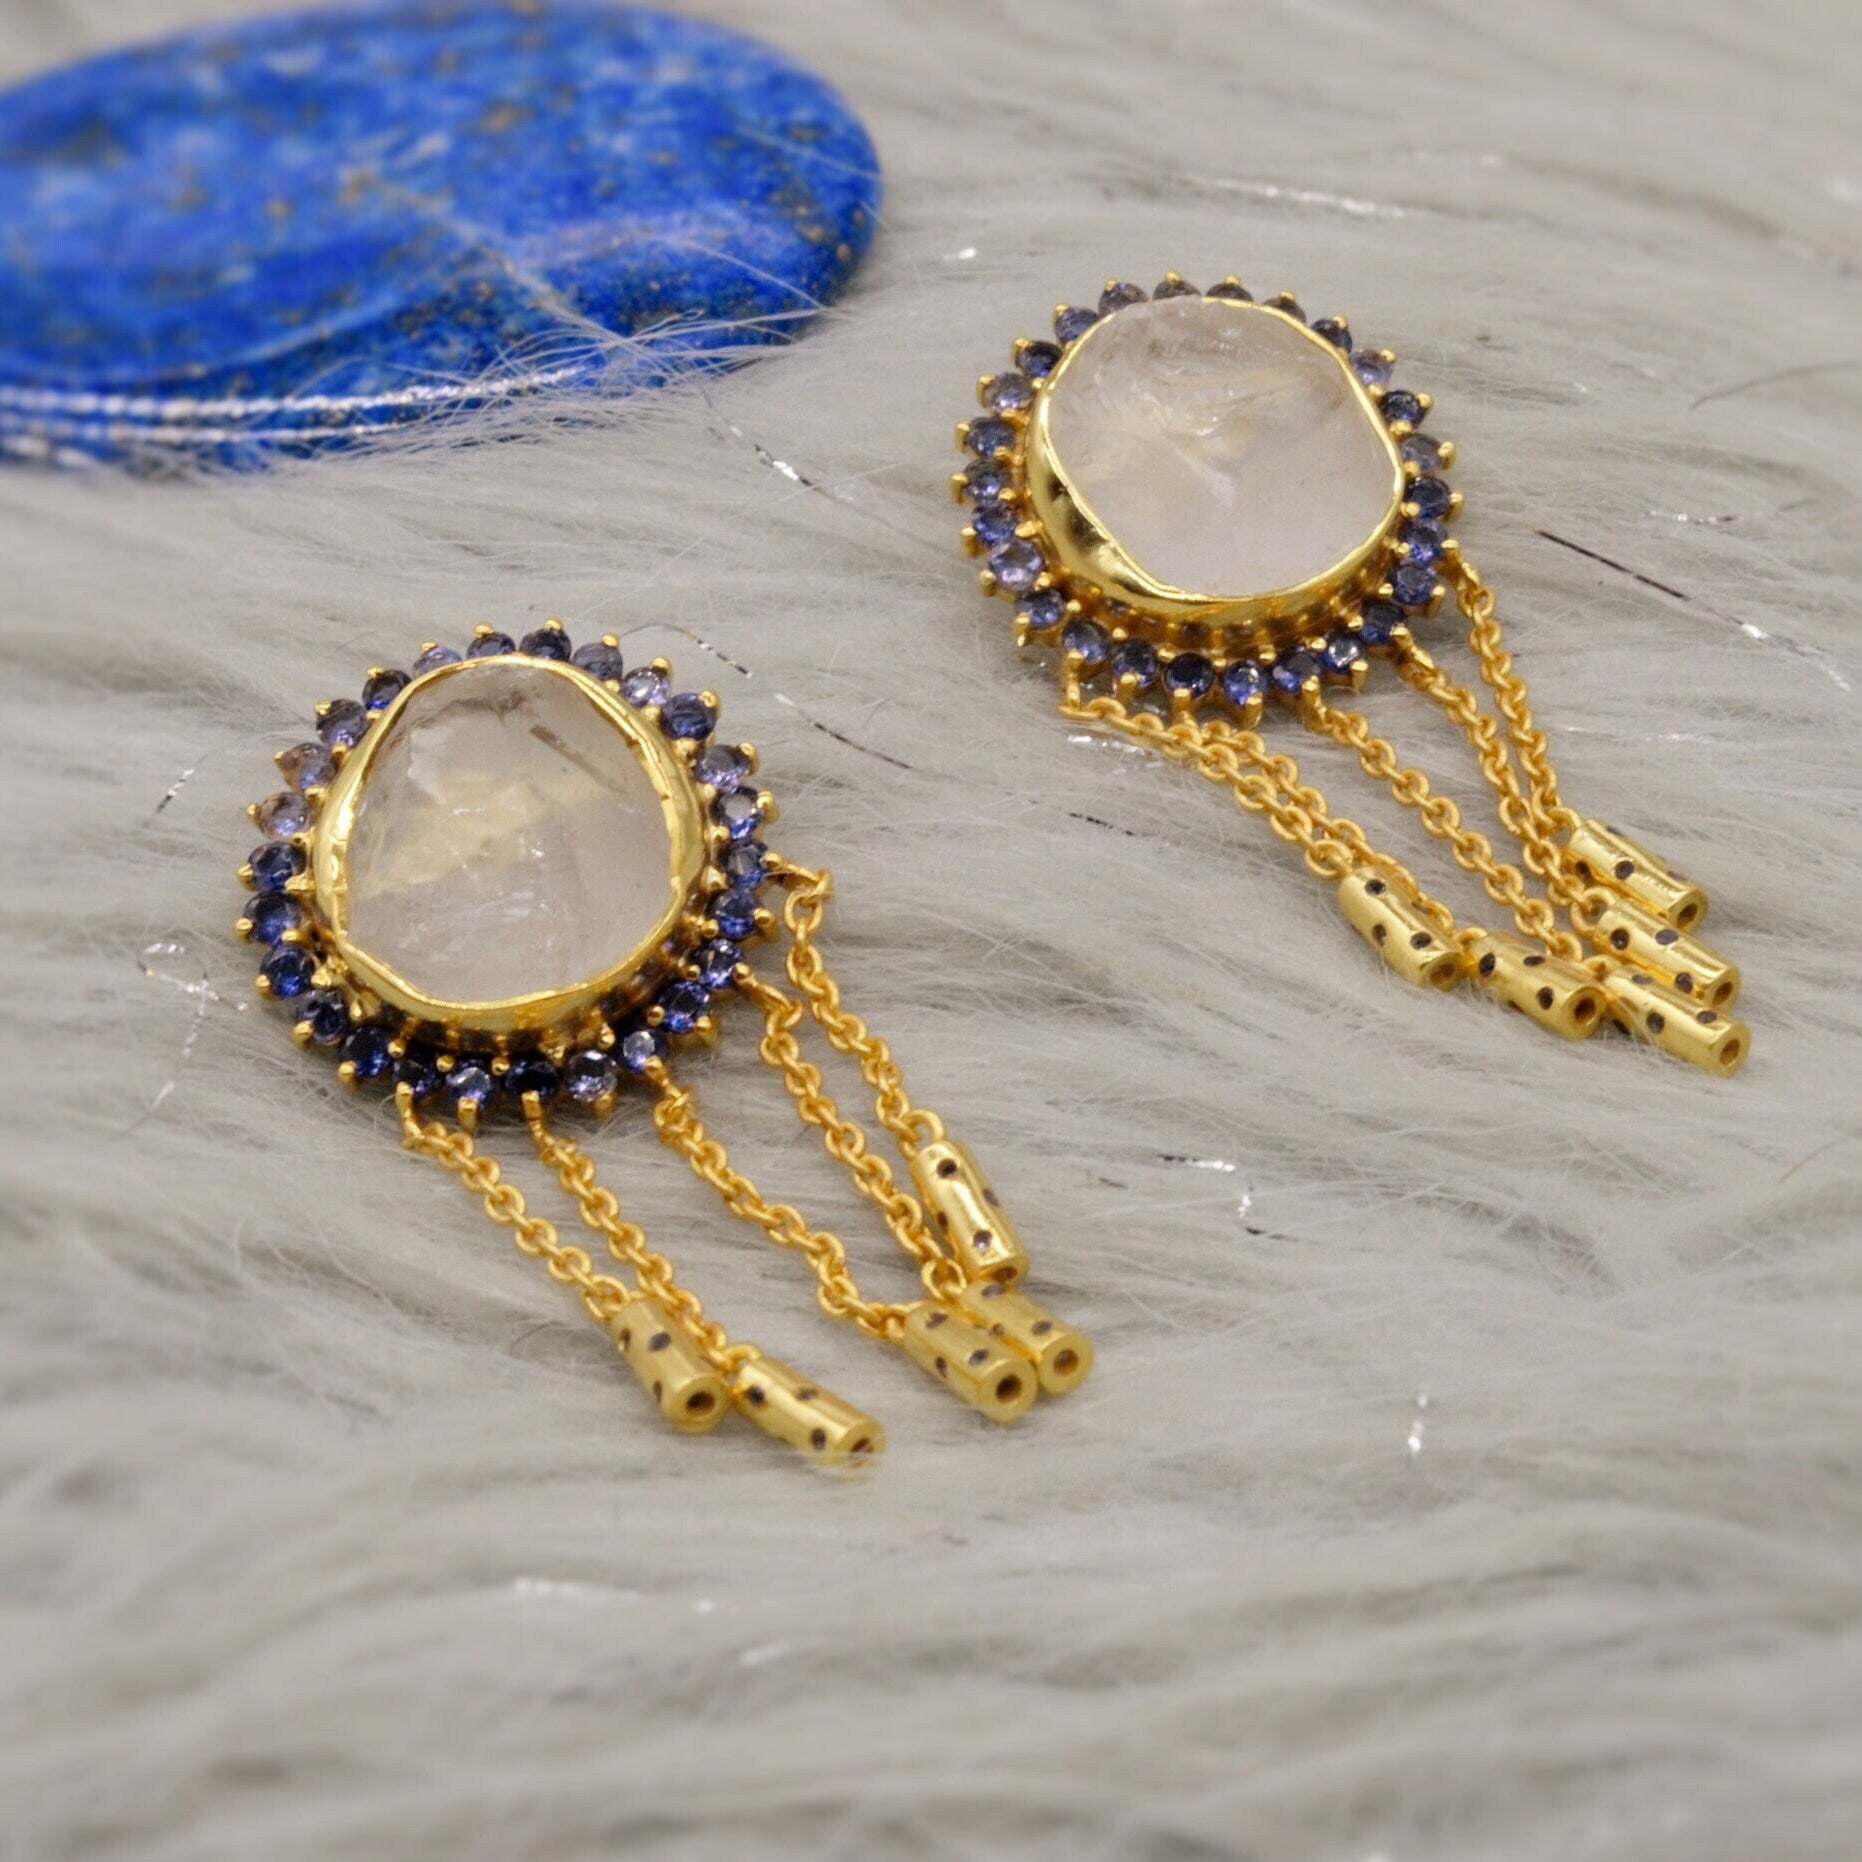 Iolite Clear Quartz Gold Earrings, Clear Quartz Crystal, Dangle Drop Earrings, Unique Gemstone Statement Earrings, Birthday Gift For Her